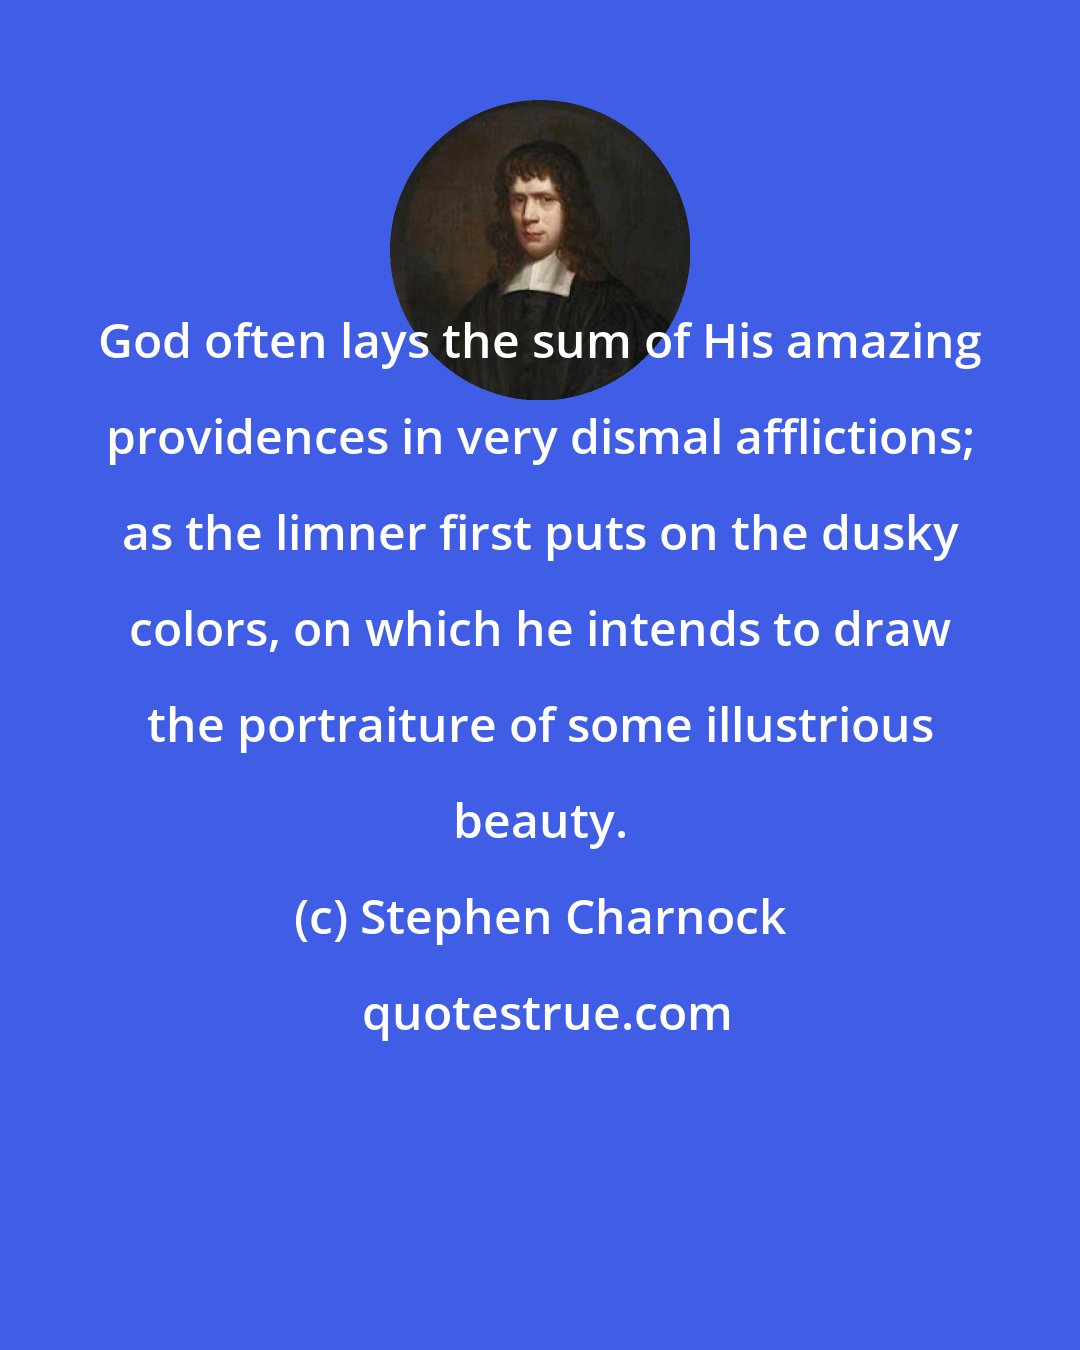 Stephen Charnock: God often lays the sum of His amazing providences in very dismal afflictions; as the limner first puts on the dusky colors, on which he intends to draw the portraiture of some illustrious beauty.